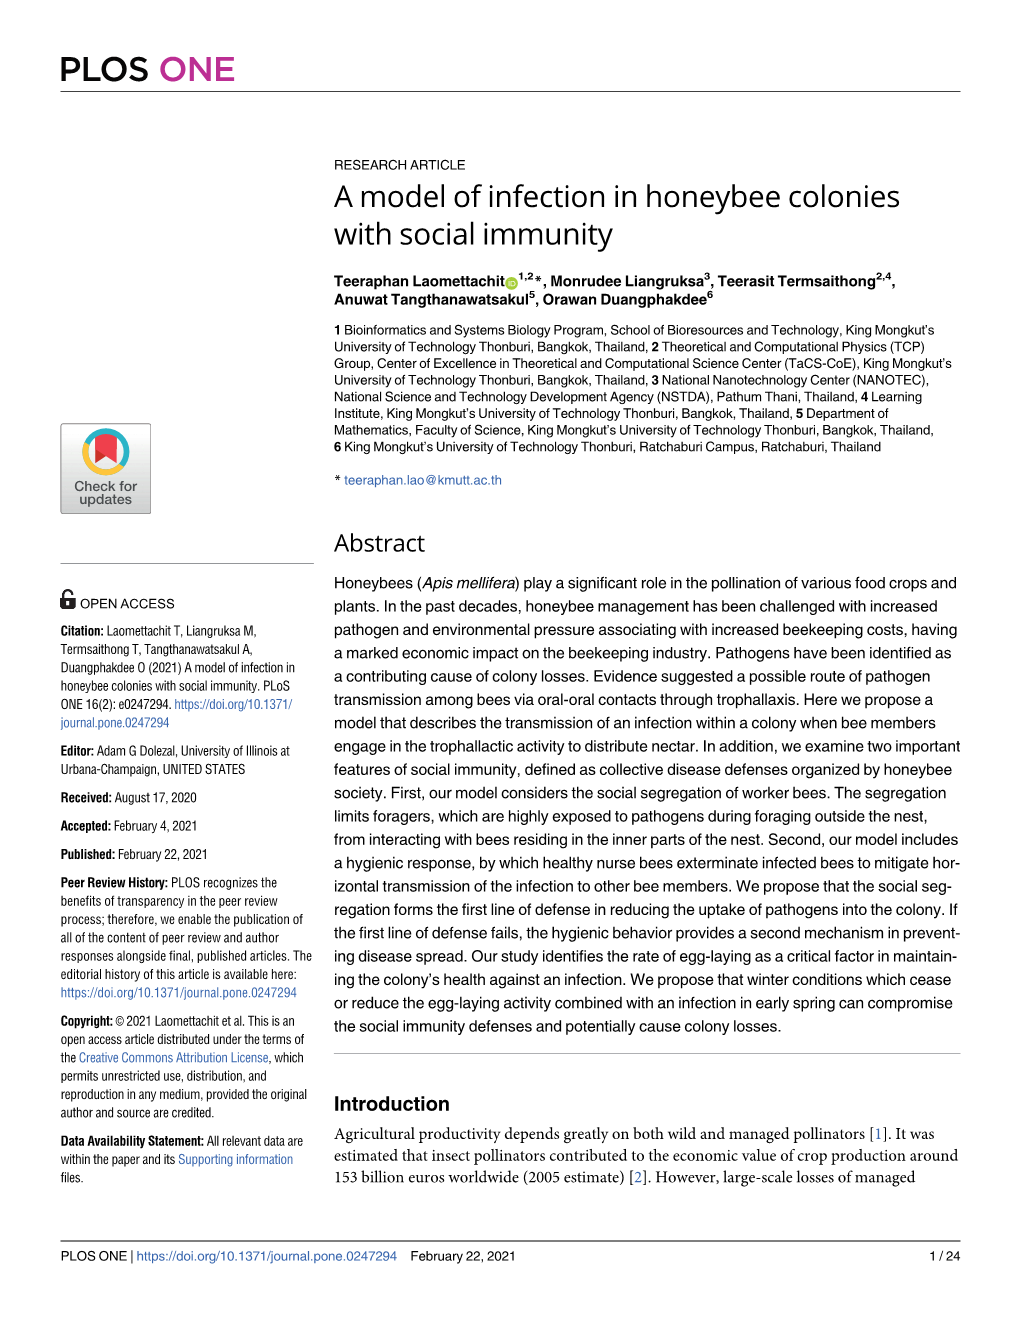 A Model of Infection in Honeybee Colonies with Social Immunity